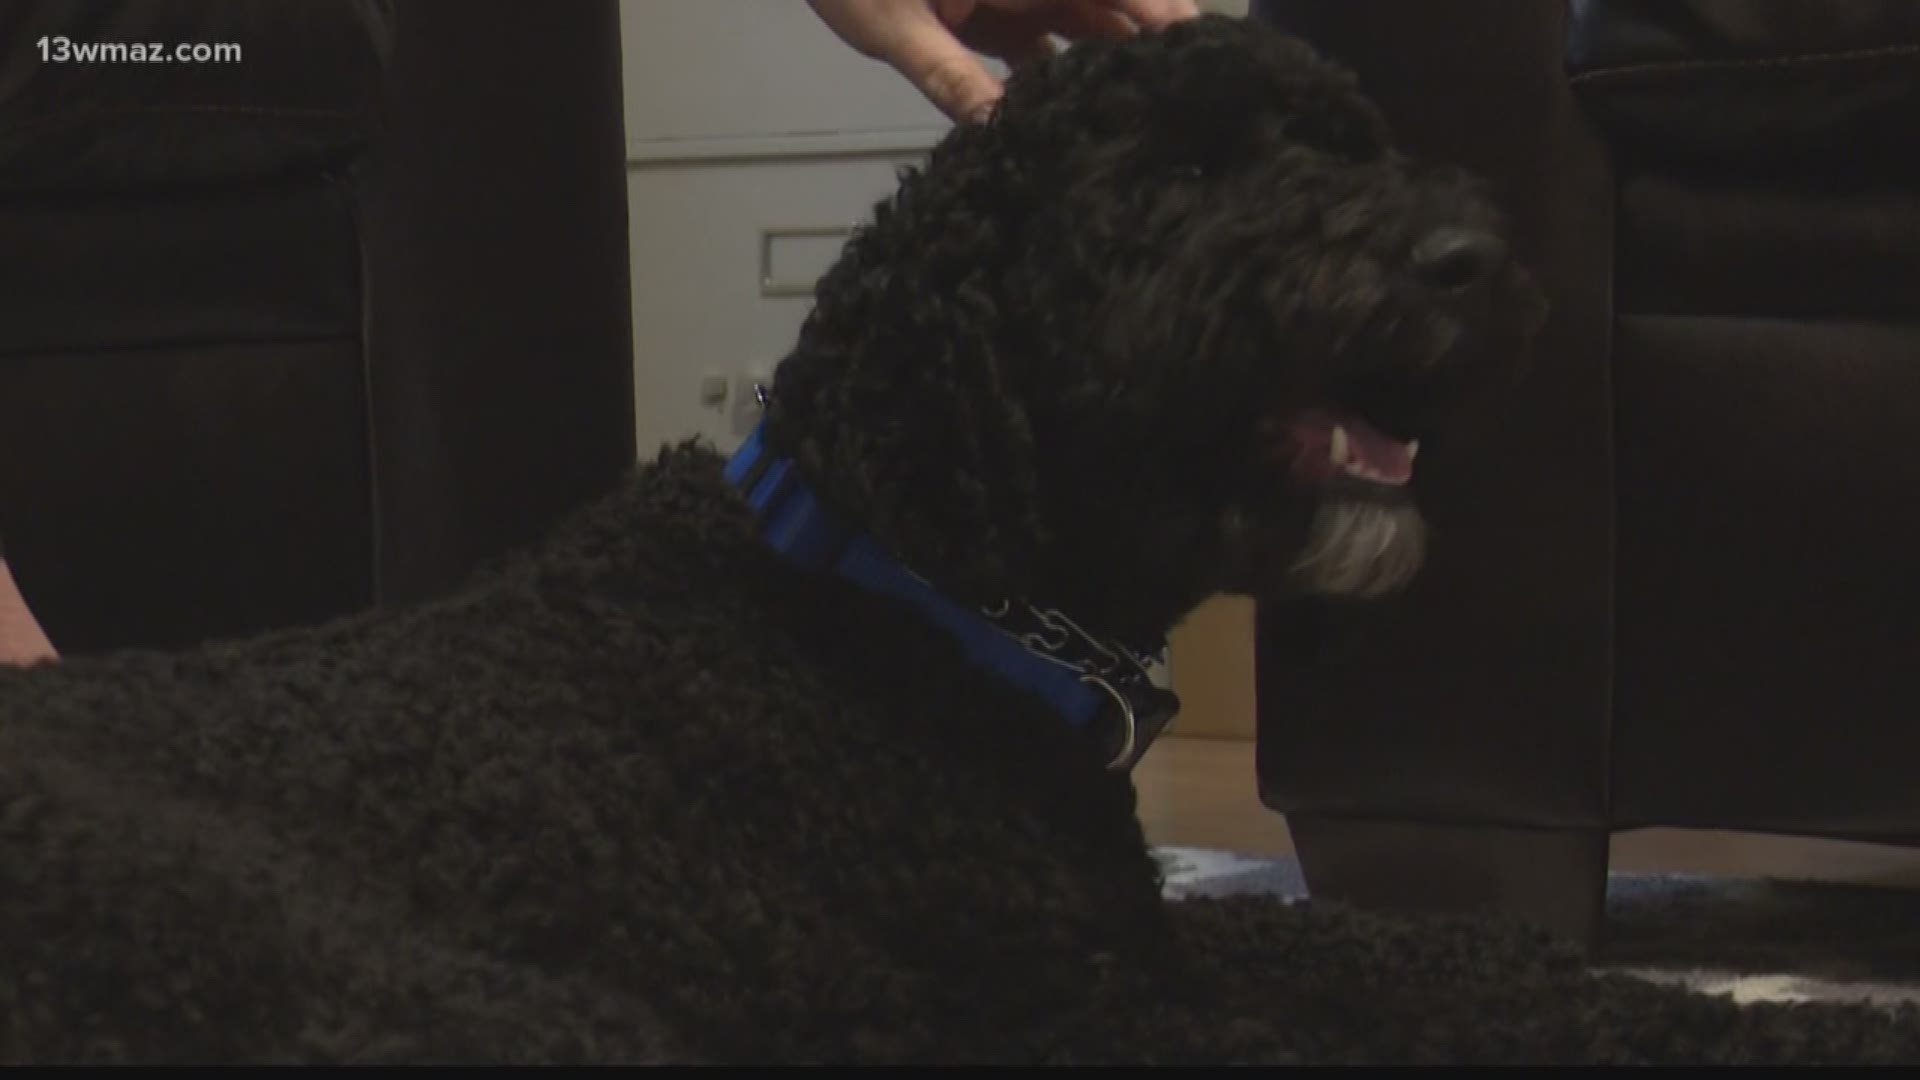 Benny the Labradoodle is more than just a pet for one Warner Robins family. He became Dylan Cochran's new best friend and guardian.